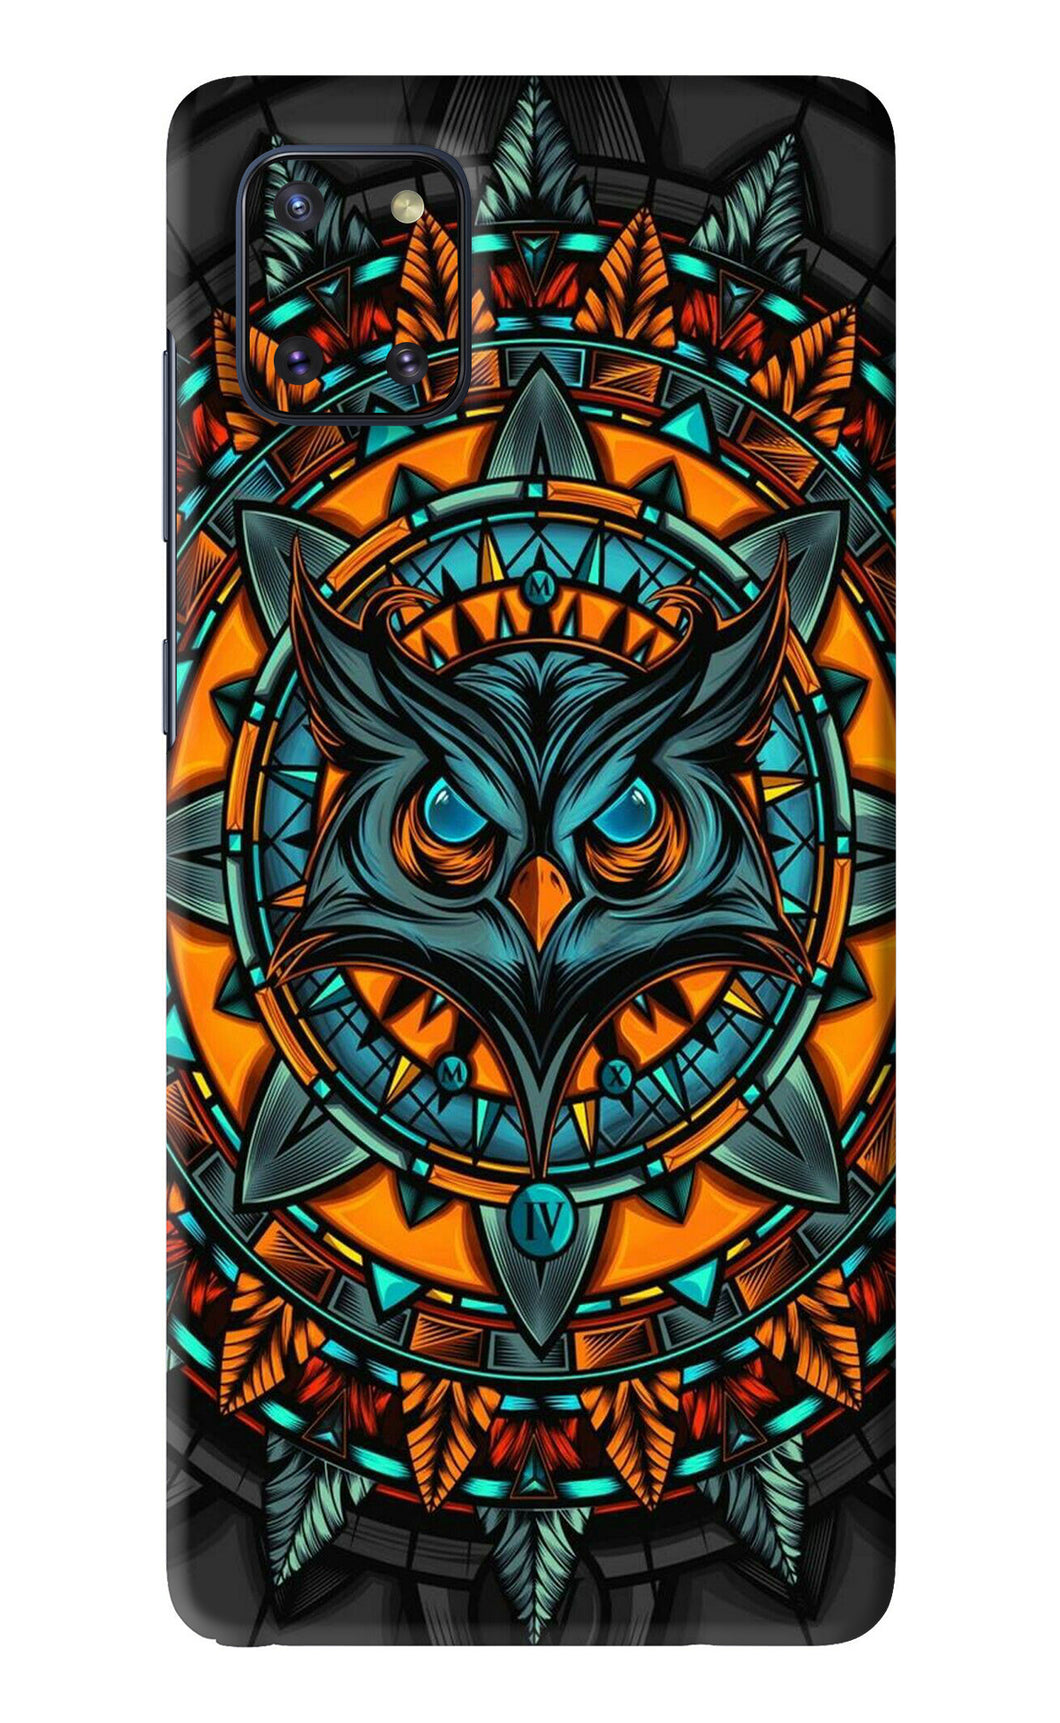 Angry Owl Art Samsung Galaxy Note 10 Lite Back Skin Wrap